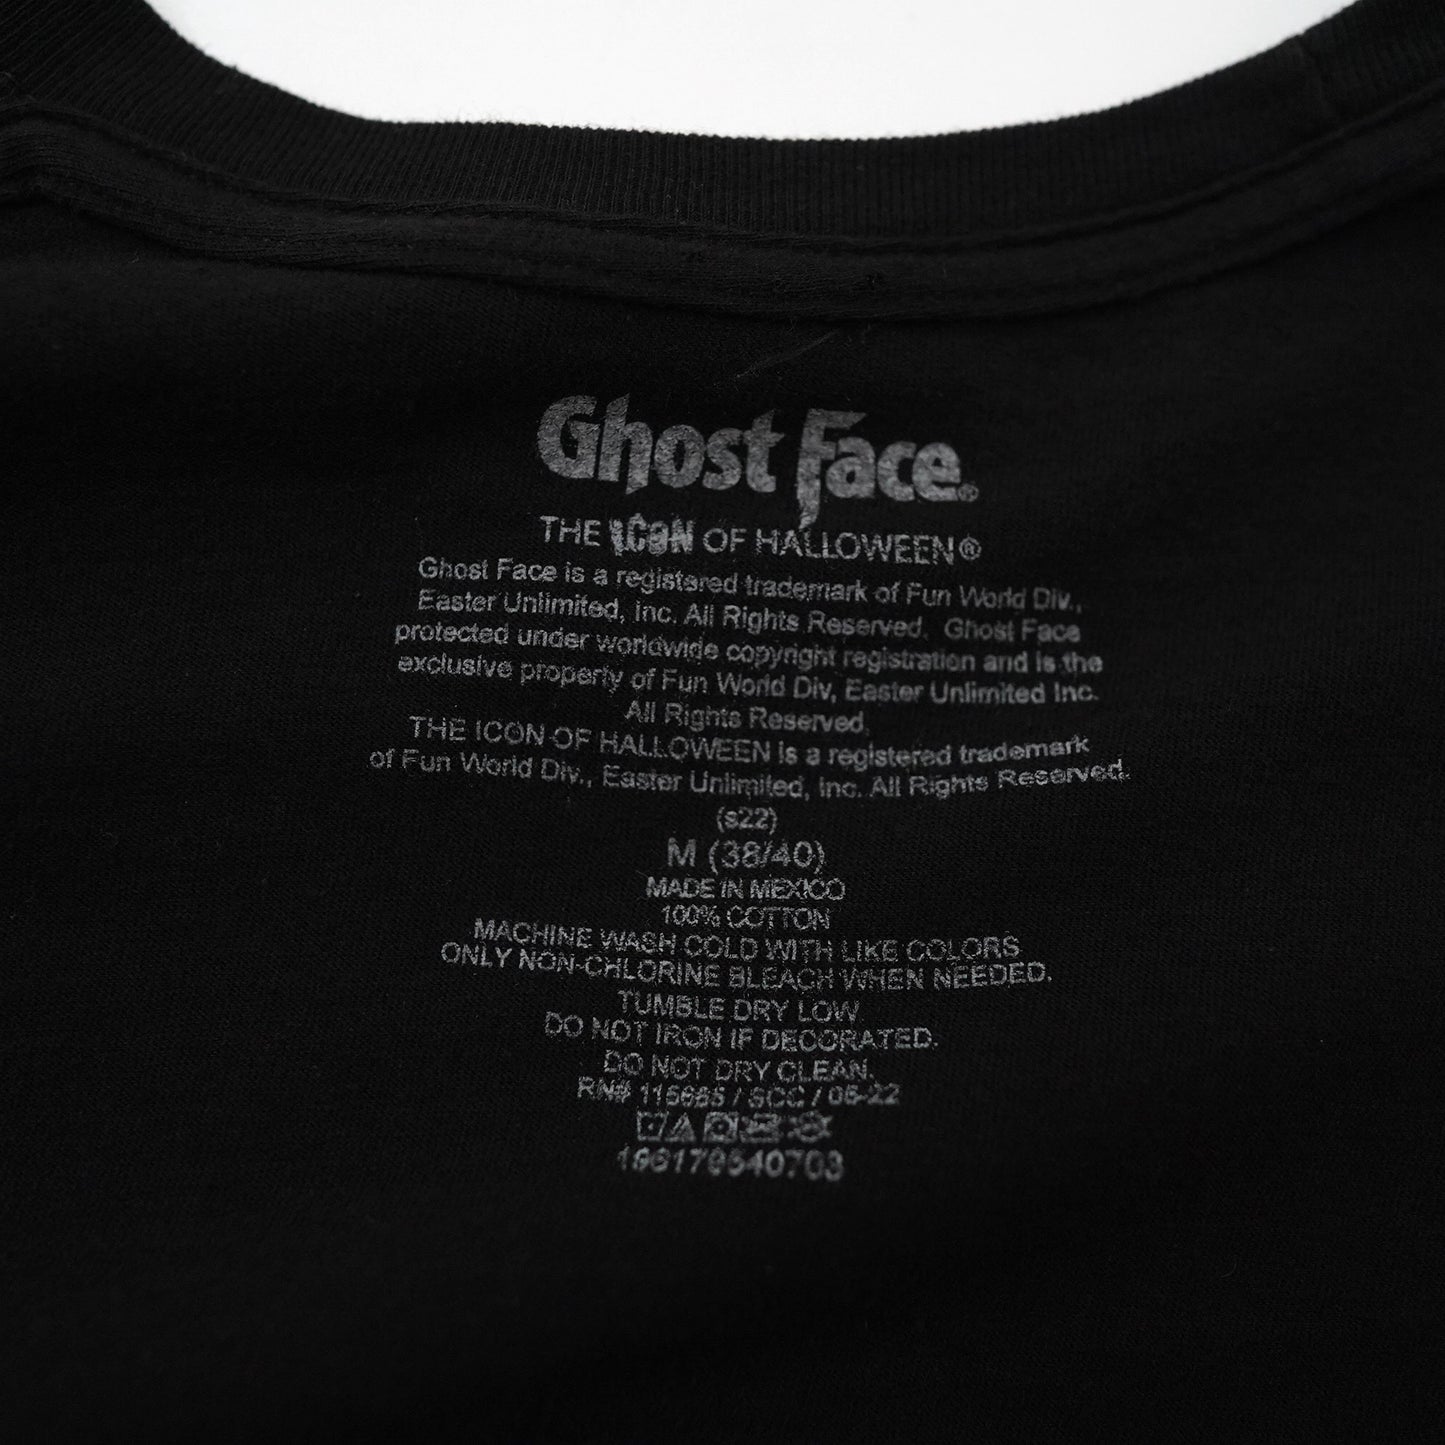 Ghost Face tee